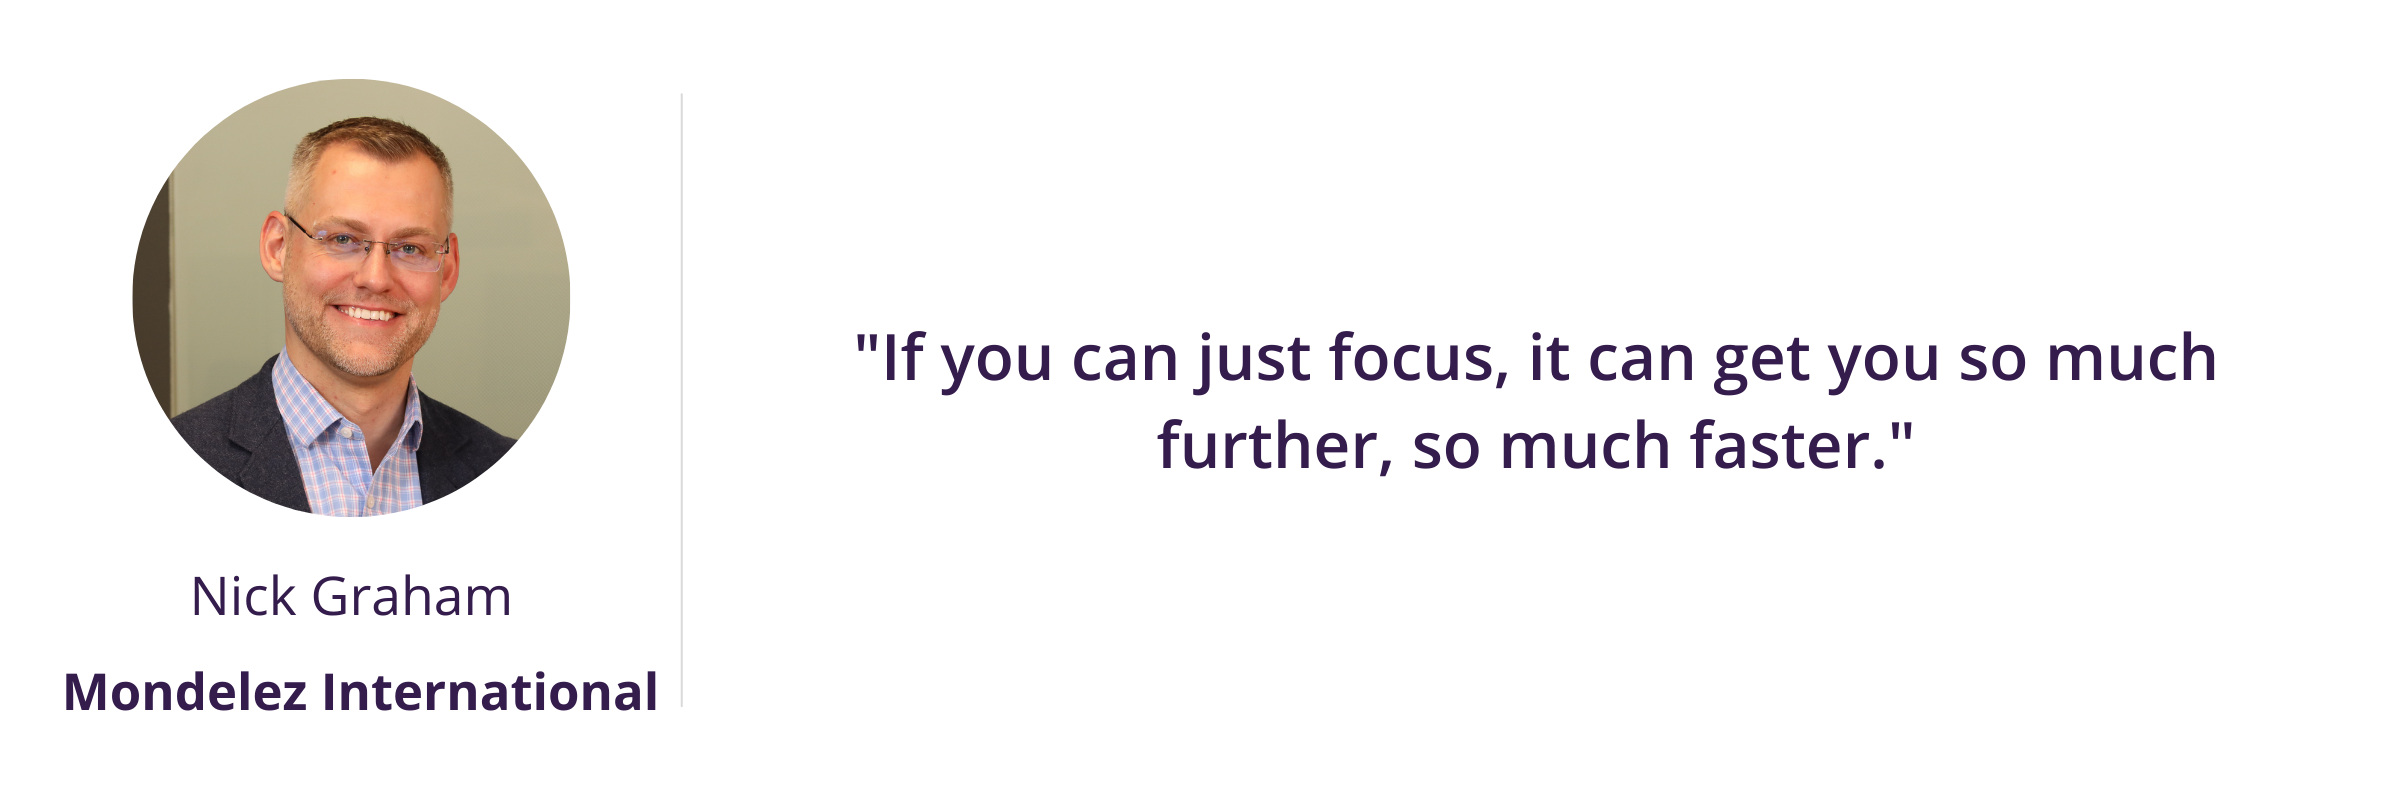 "If you can just focus, it can get you so much further, so much faster."